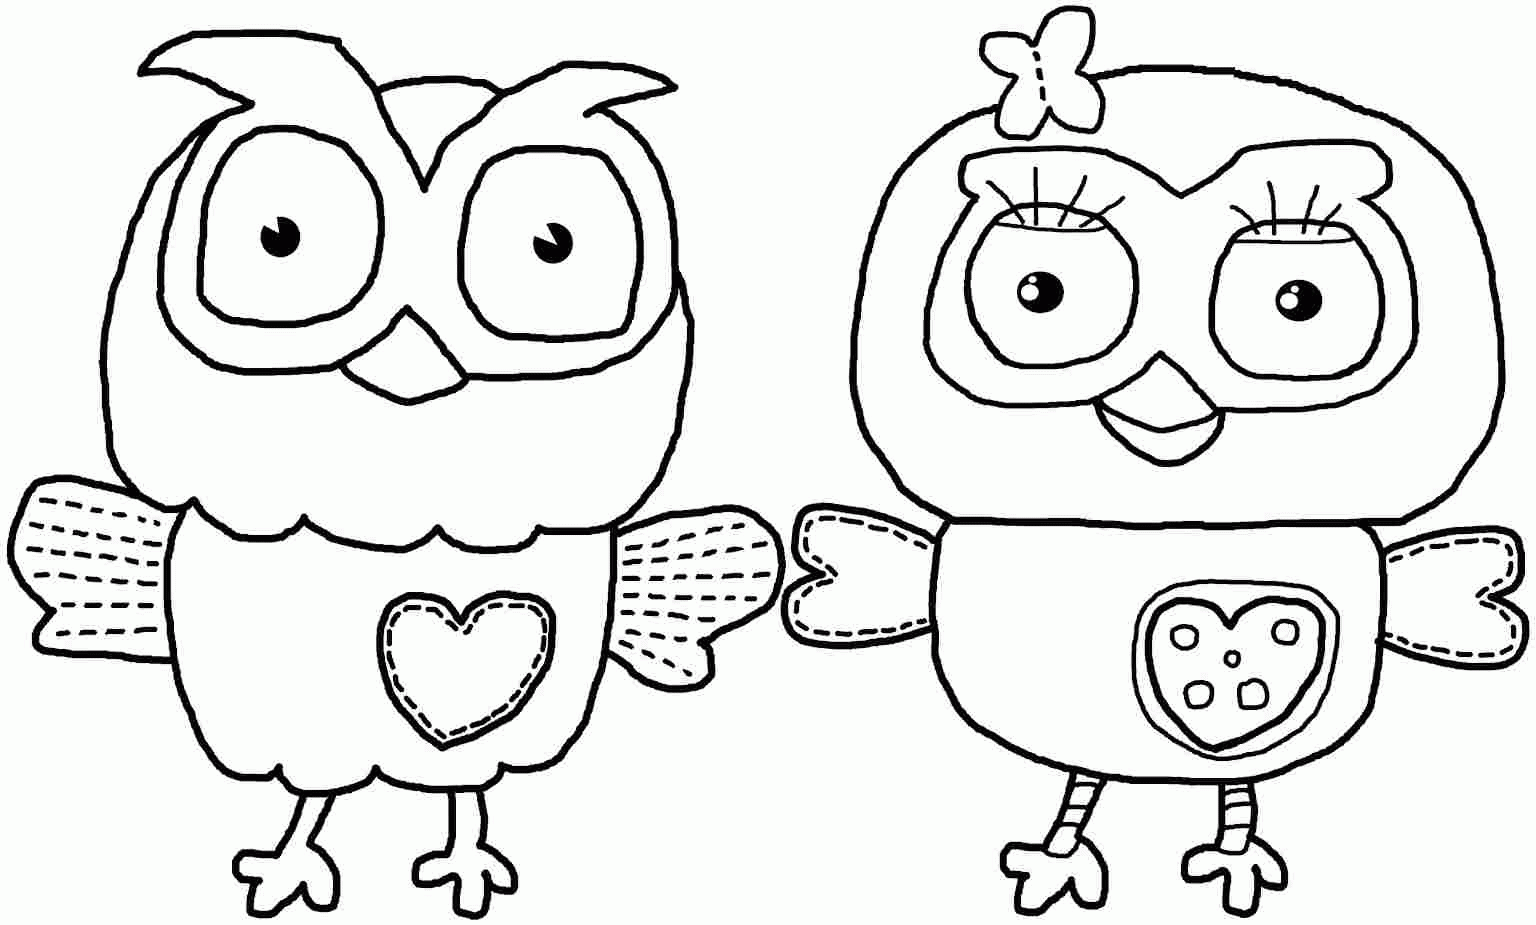 free-free-printable-coloring-pages-of-flowers-for-kids-download-free-free-printable-coloring